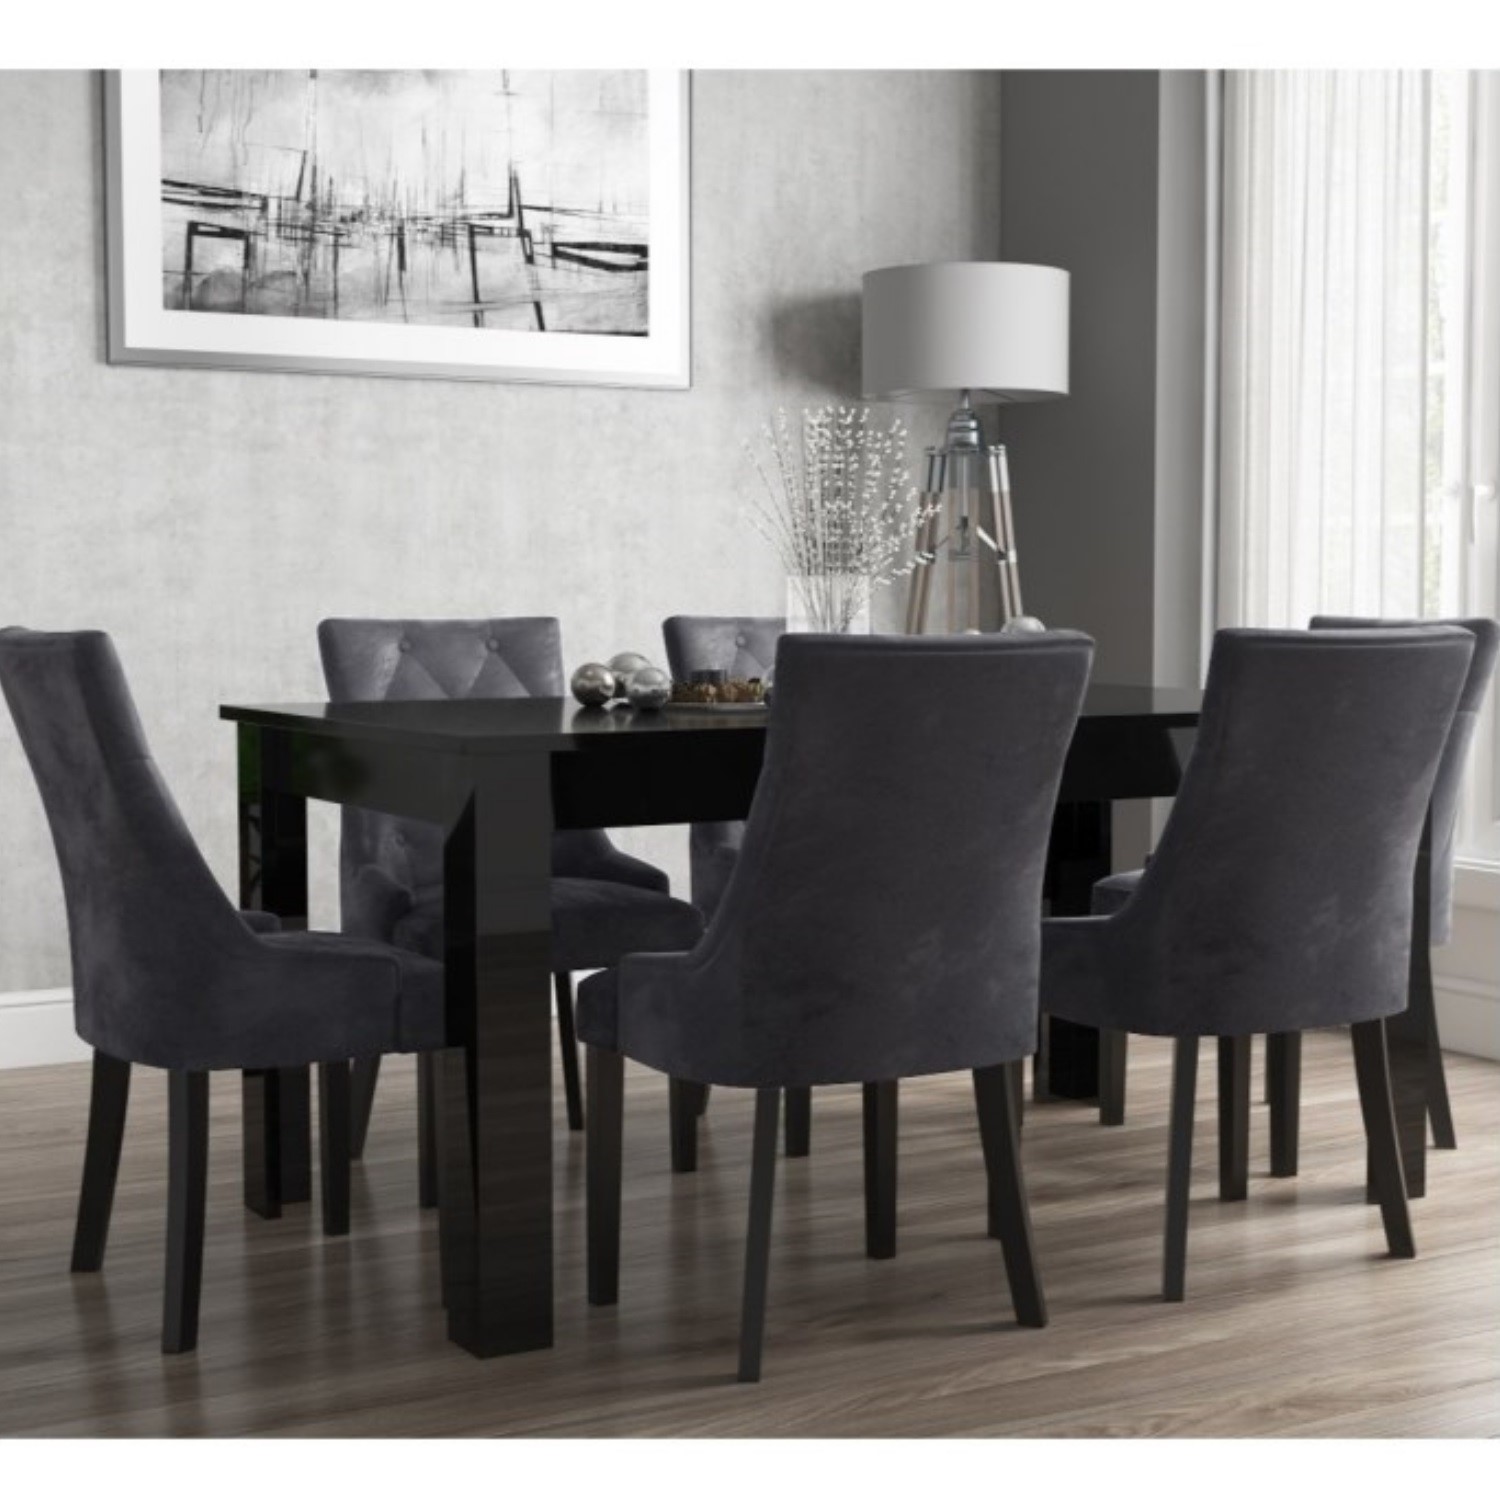 Extendable Dining Table In Black High, Dining Table Chairs Set Of 6 Grey